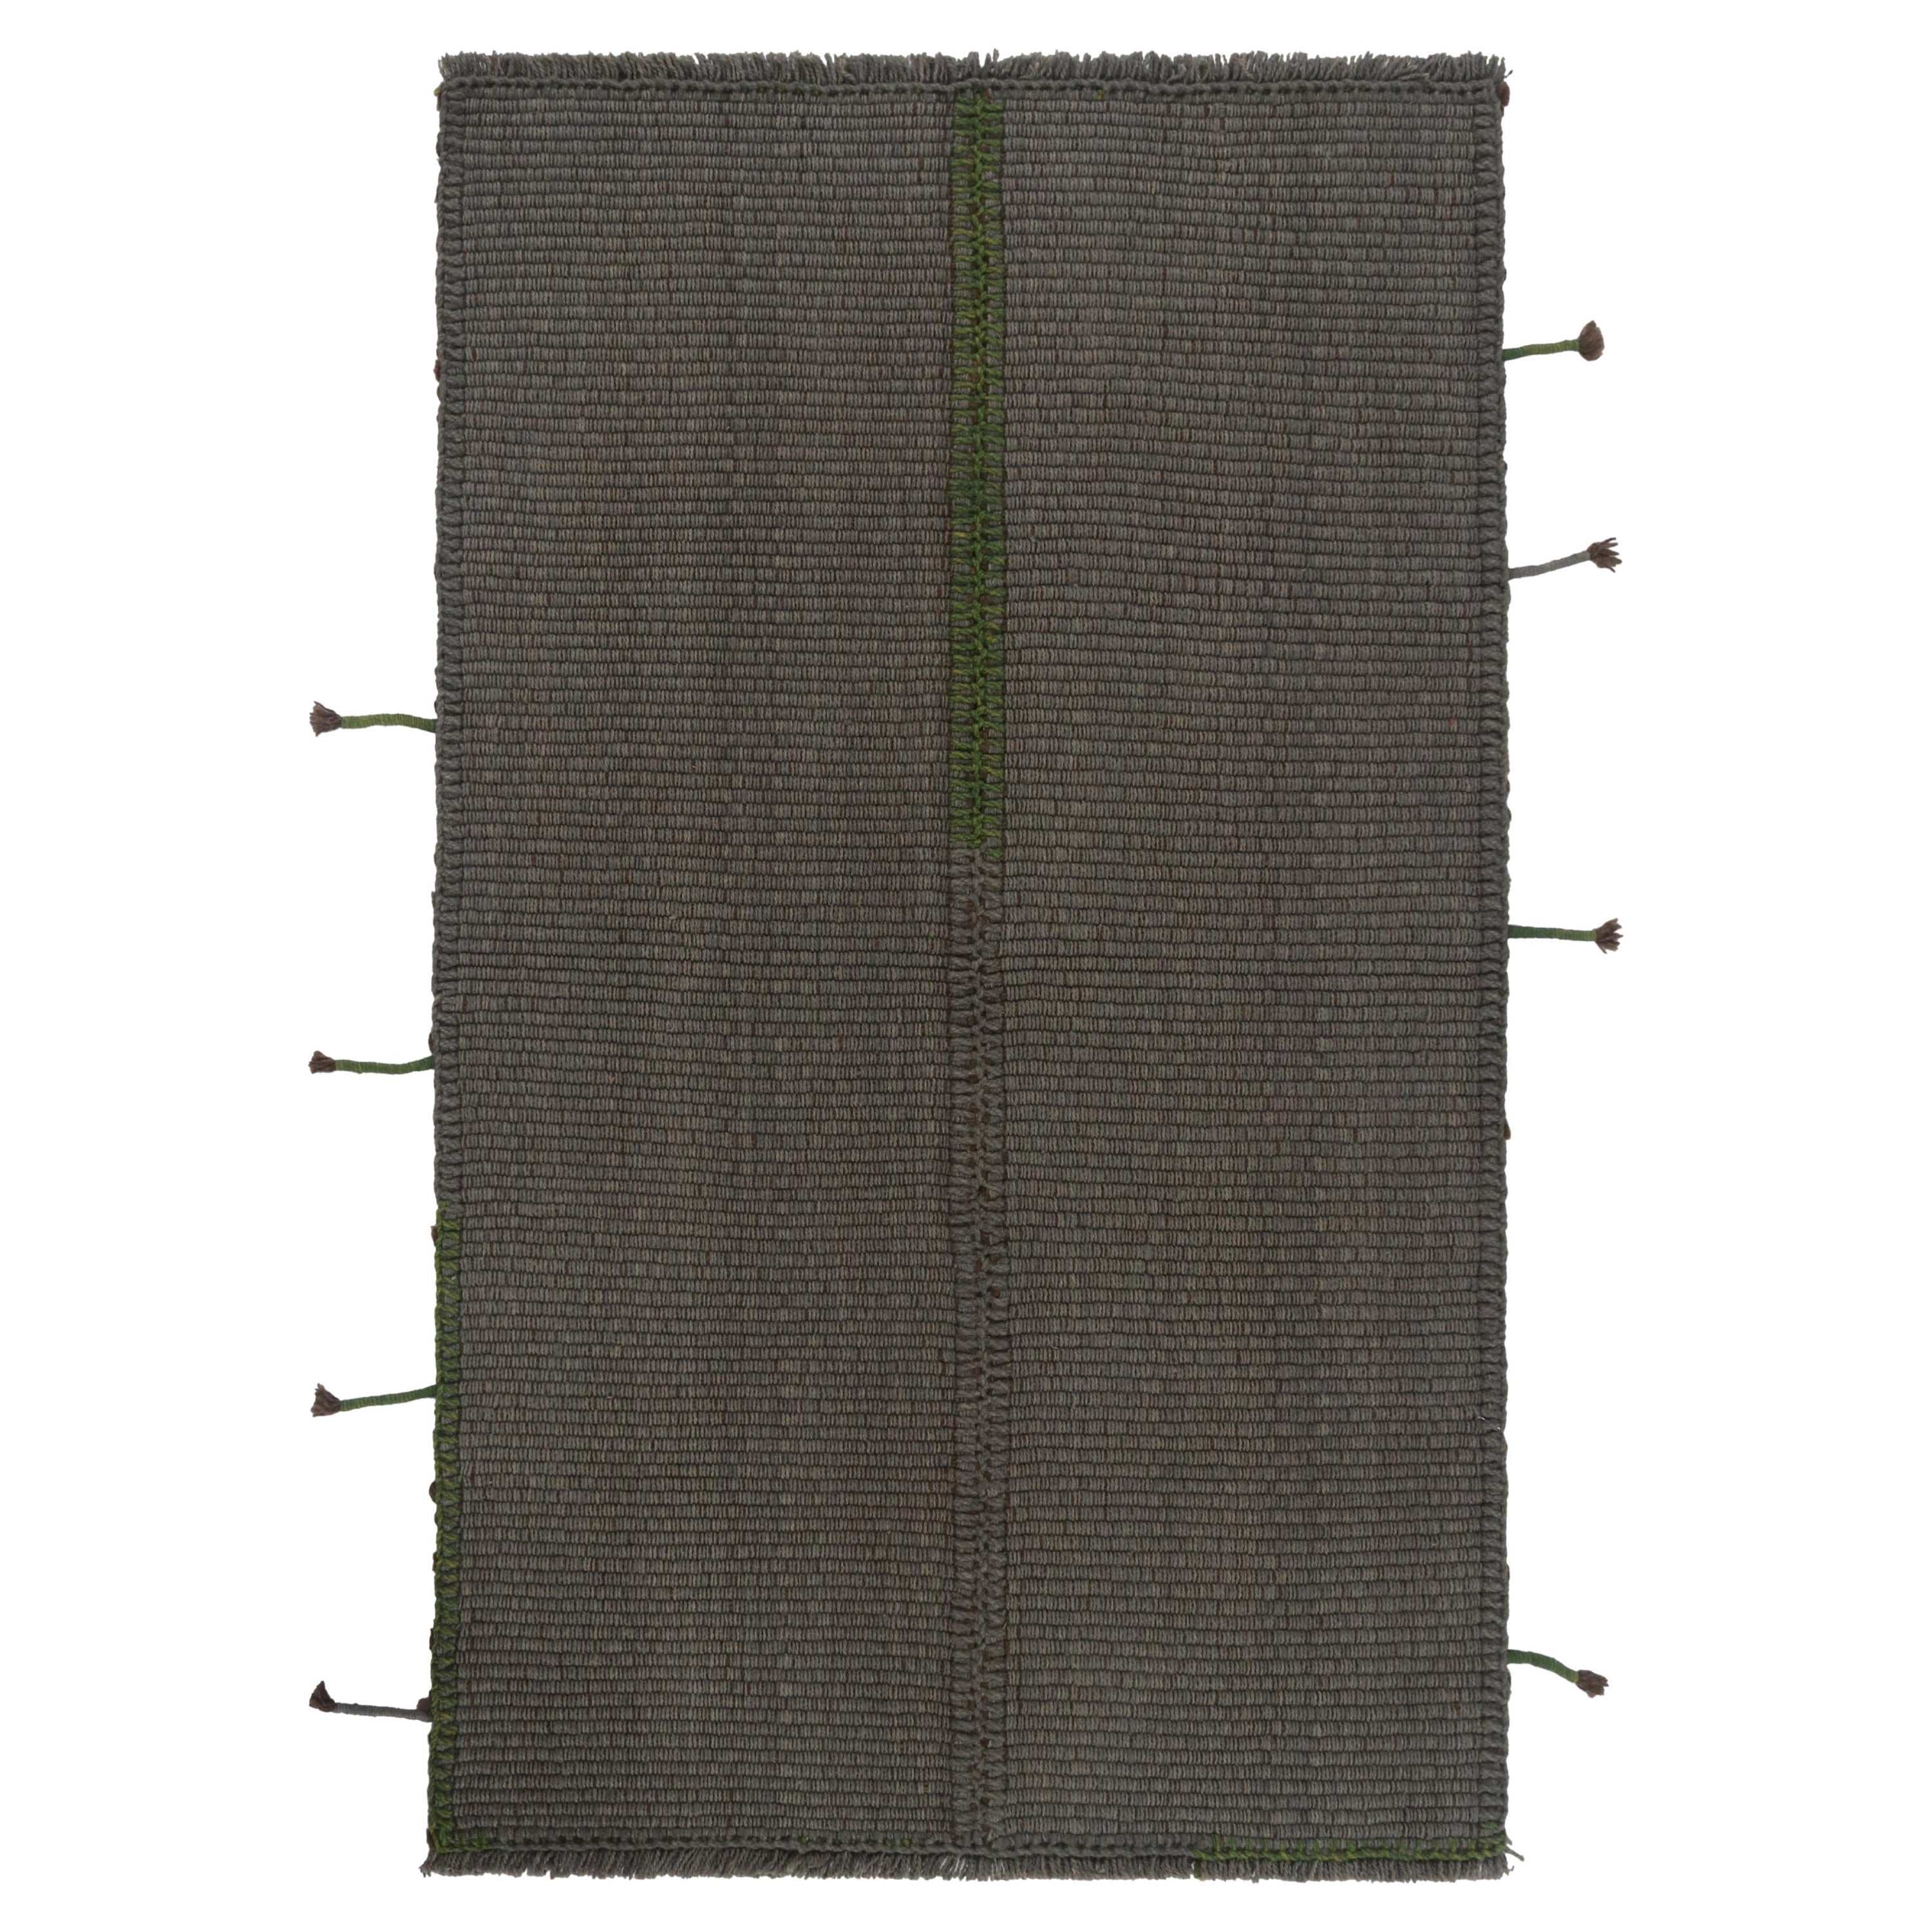 Rug & Kilim’s Contemporary Kilim in Gray with Green and Brown Accents For Sale